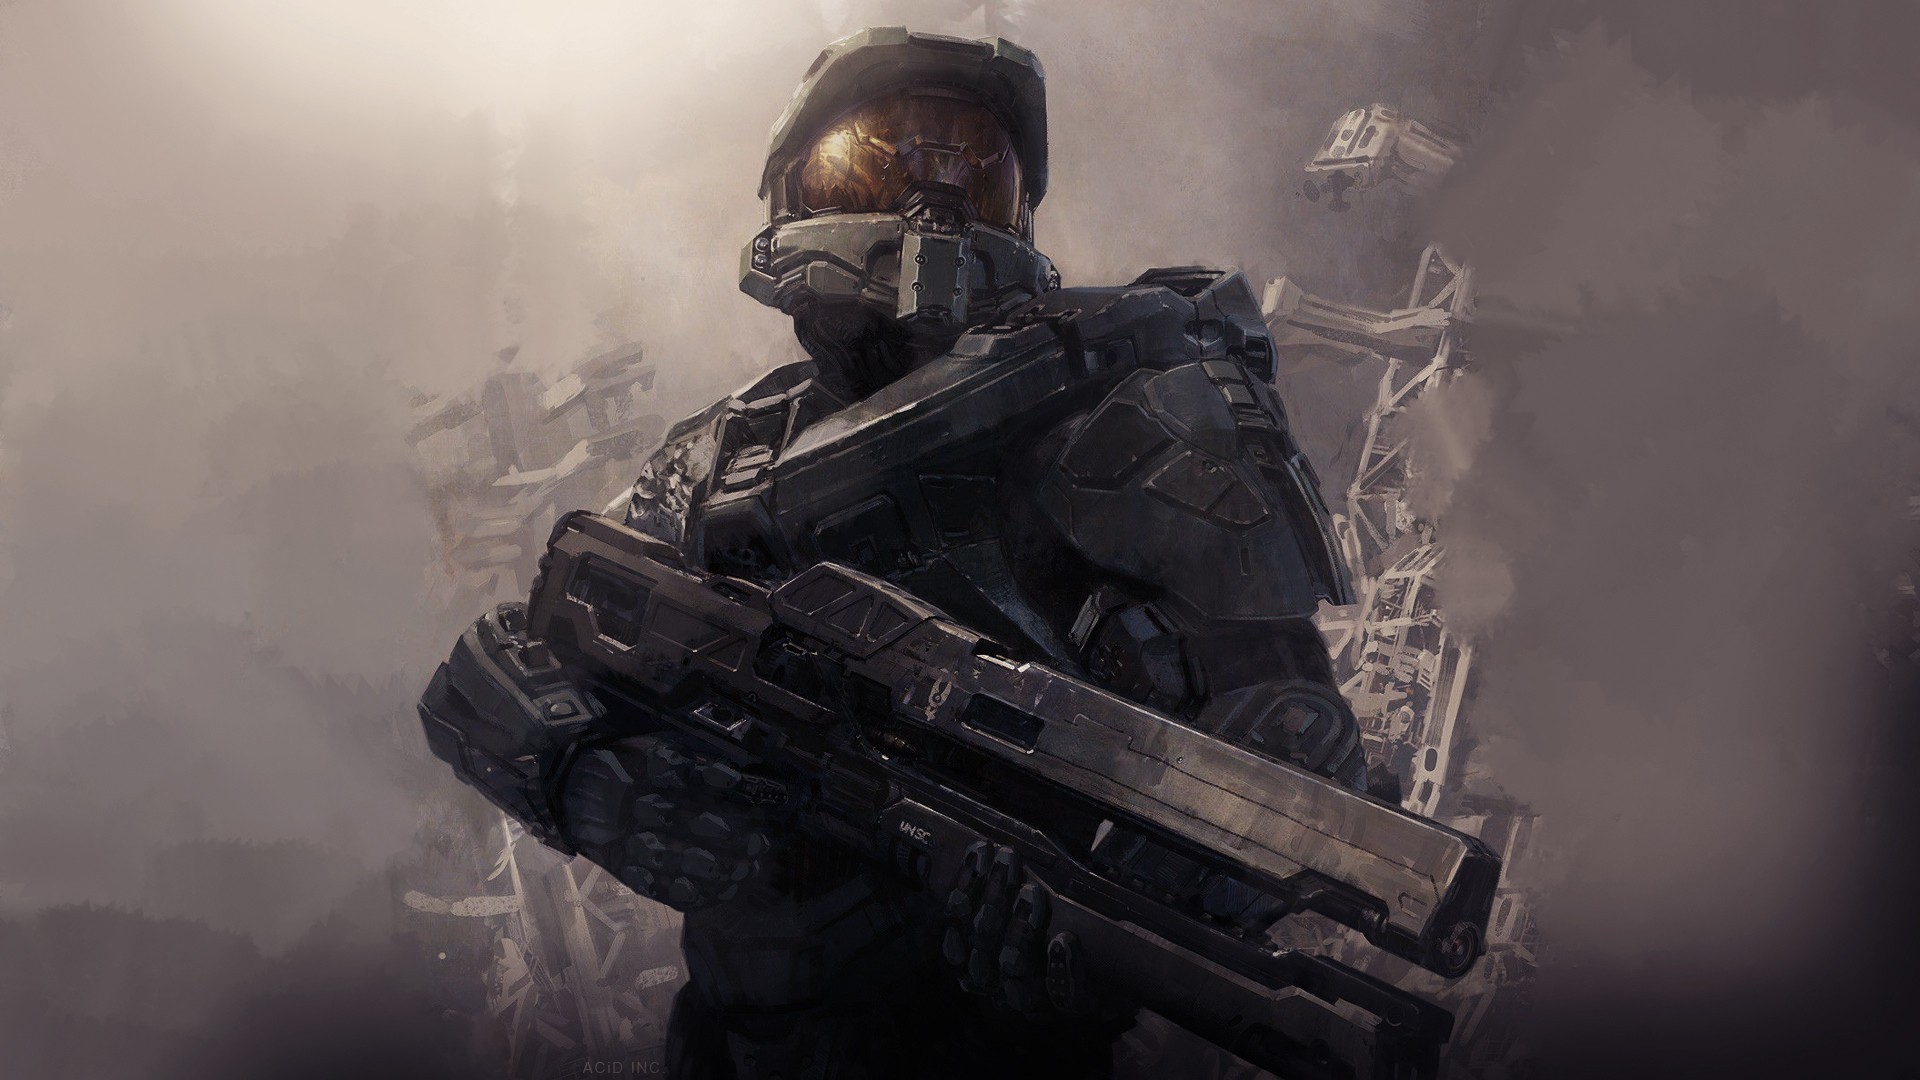 Halo 4, Halo, Master Chief, Halo: Master Chief Collection, 343 Industries, Xbox 360, Xbox One, Artwork, Video Games Wallpaper